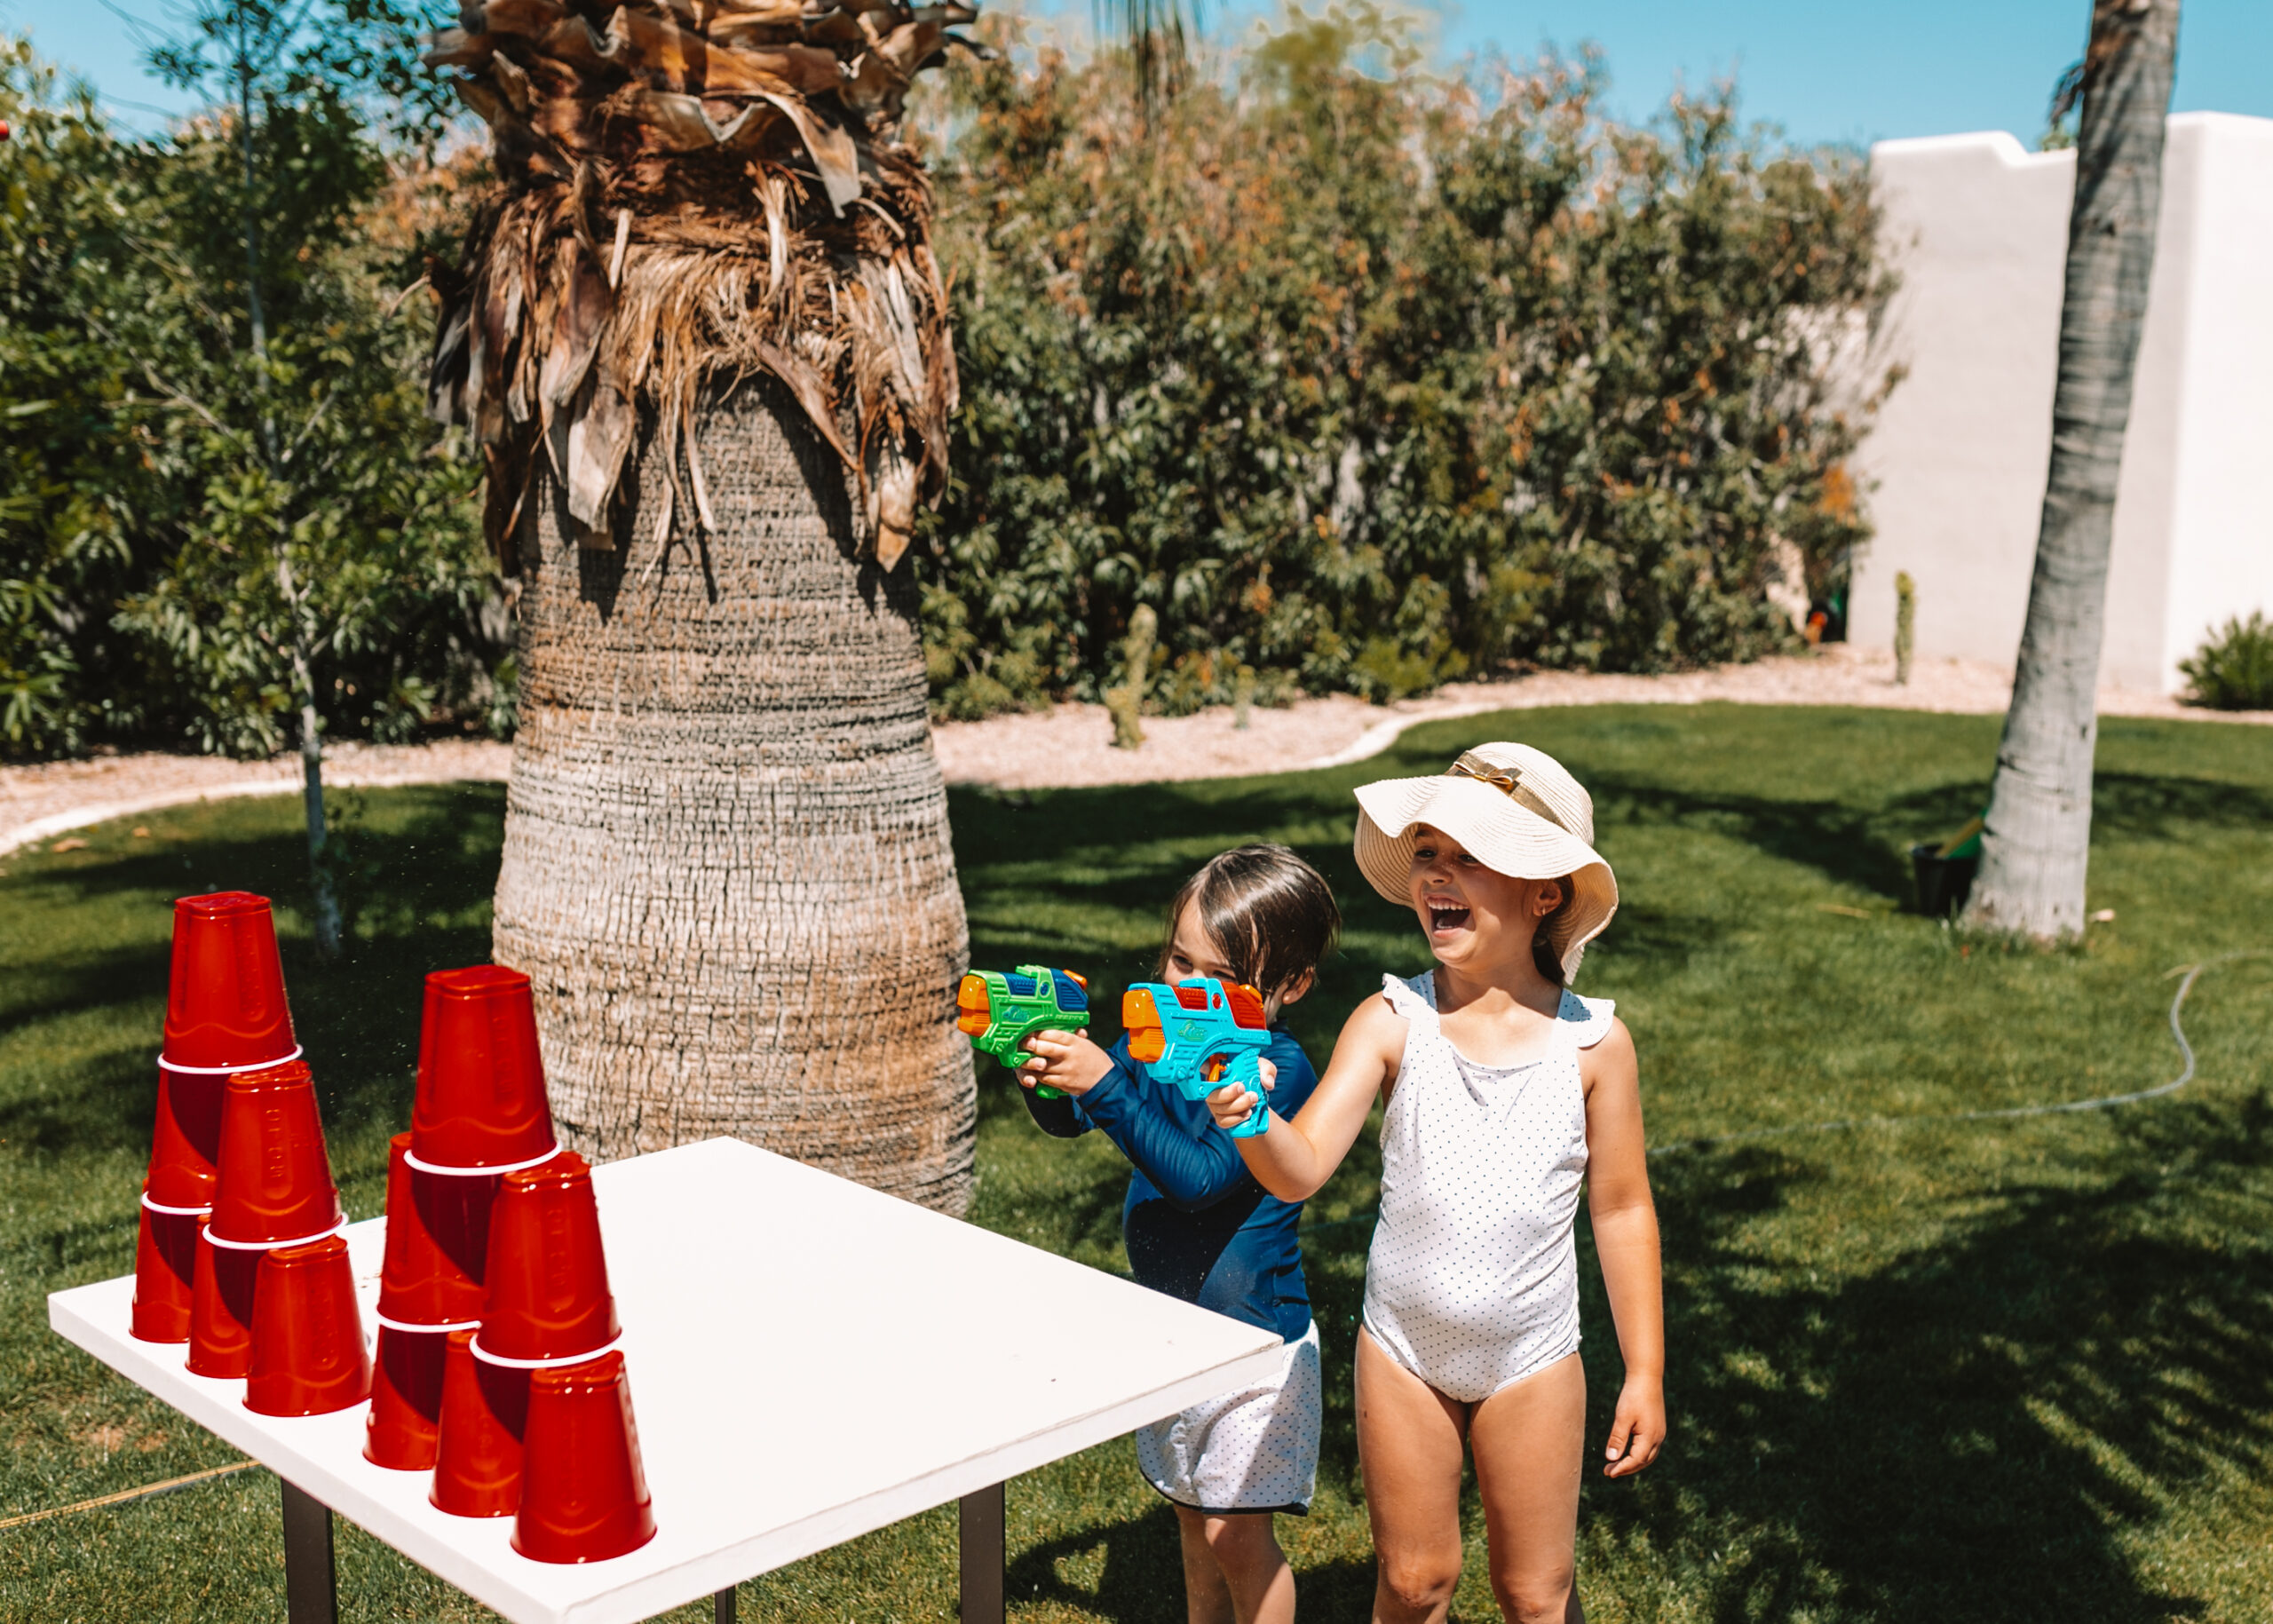 water gun cup shooting. set them up in a tower and see who can knock them all over first! #theldlhome #stayhome #watergunfun #backyardactivities